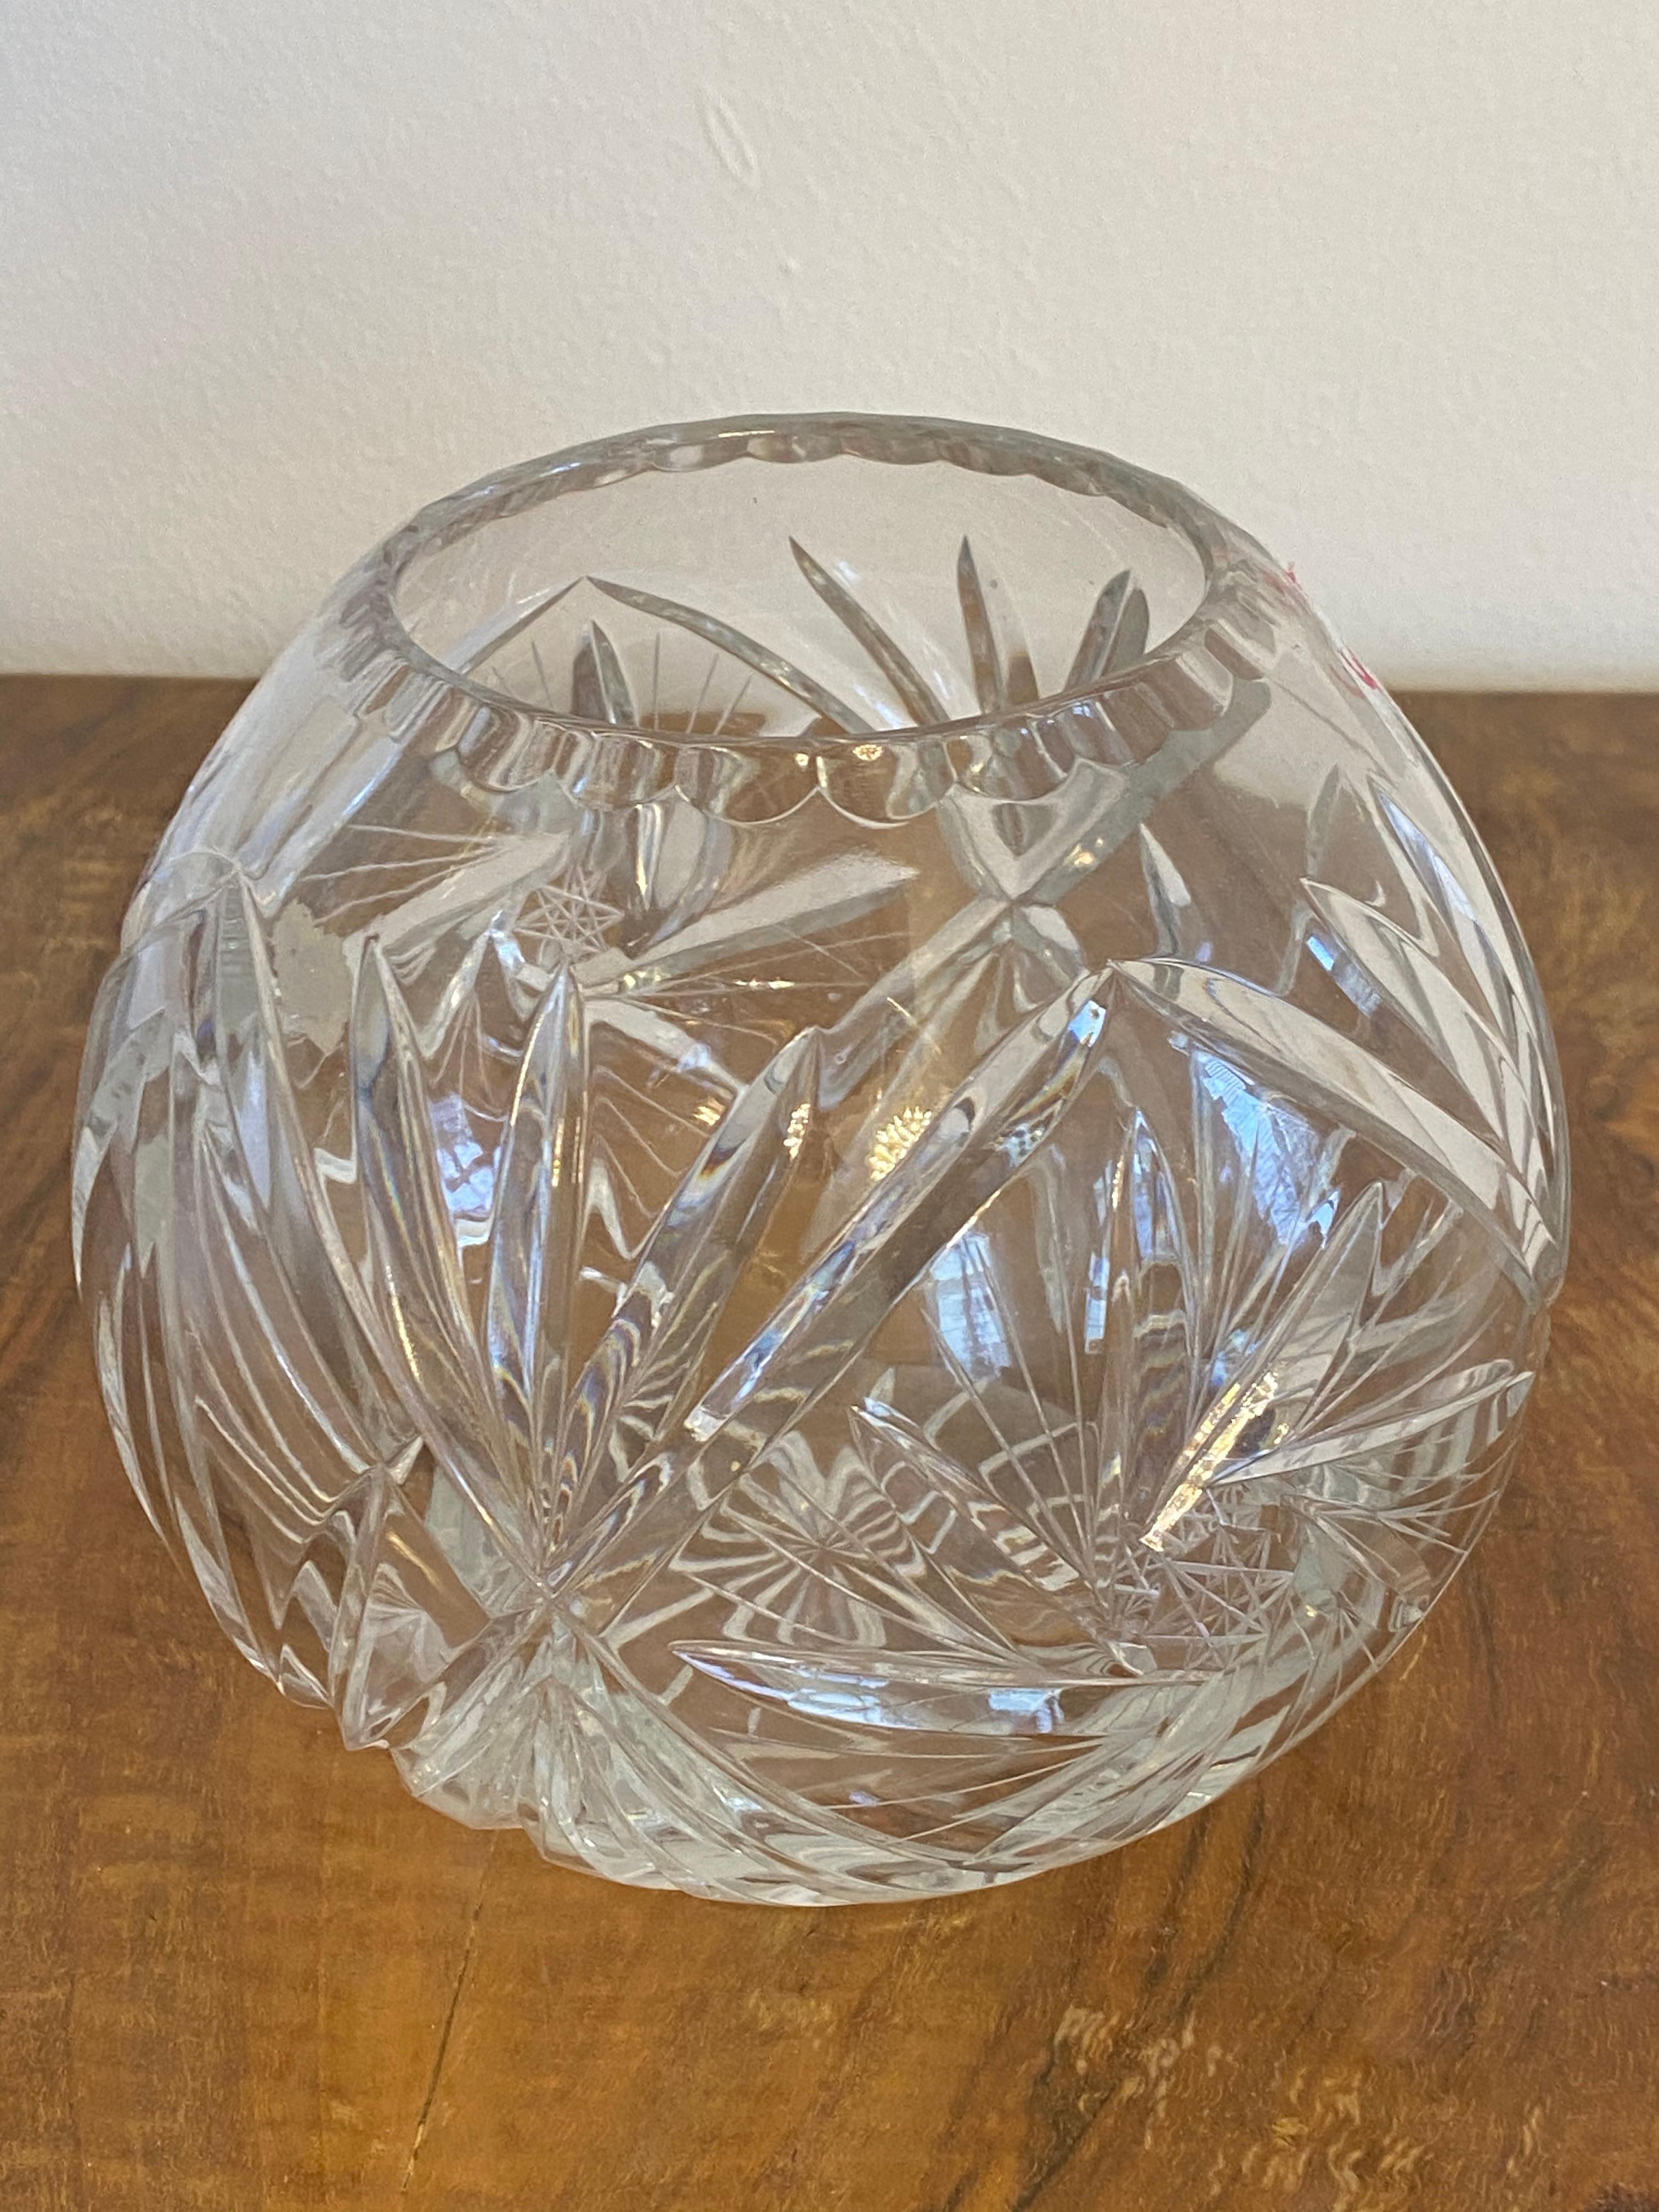 Extravagant cut and polished crystal bowl made circa the 1970s in one of the Bohemian glass works.